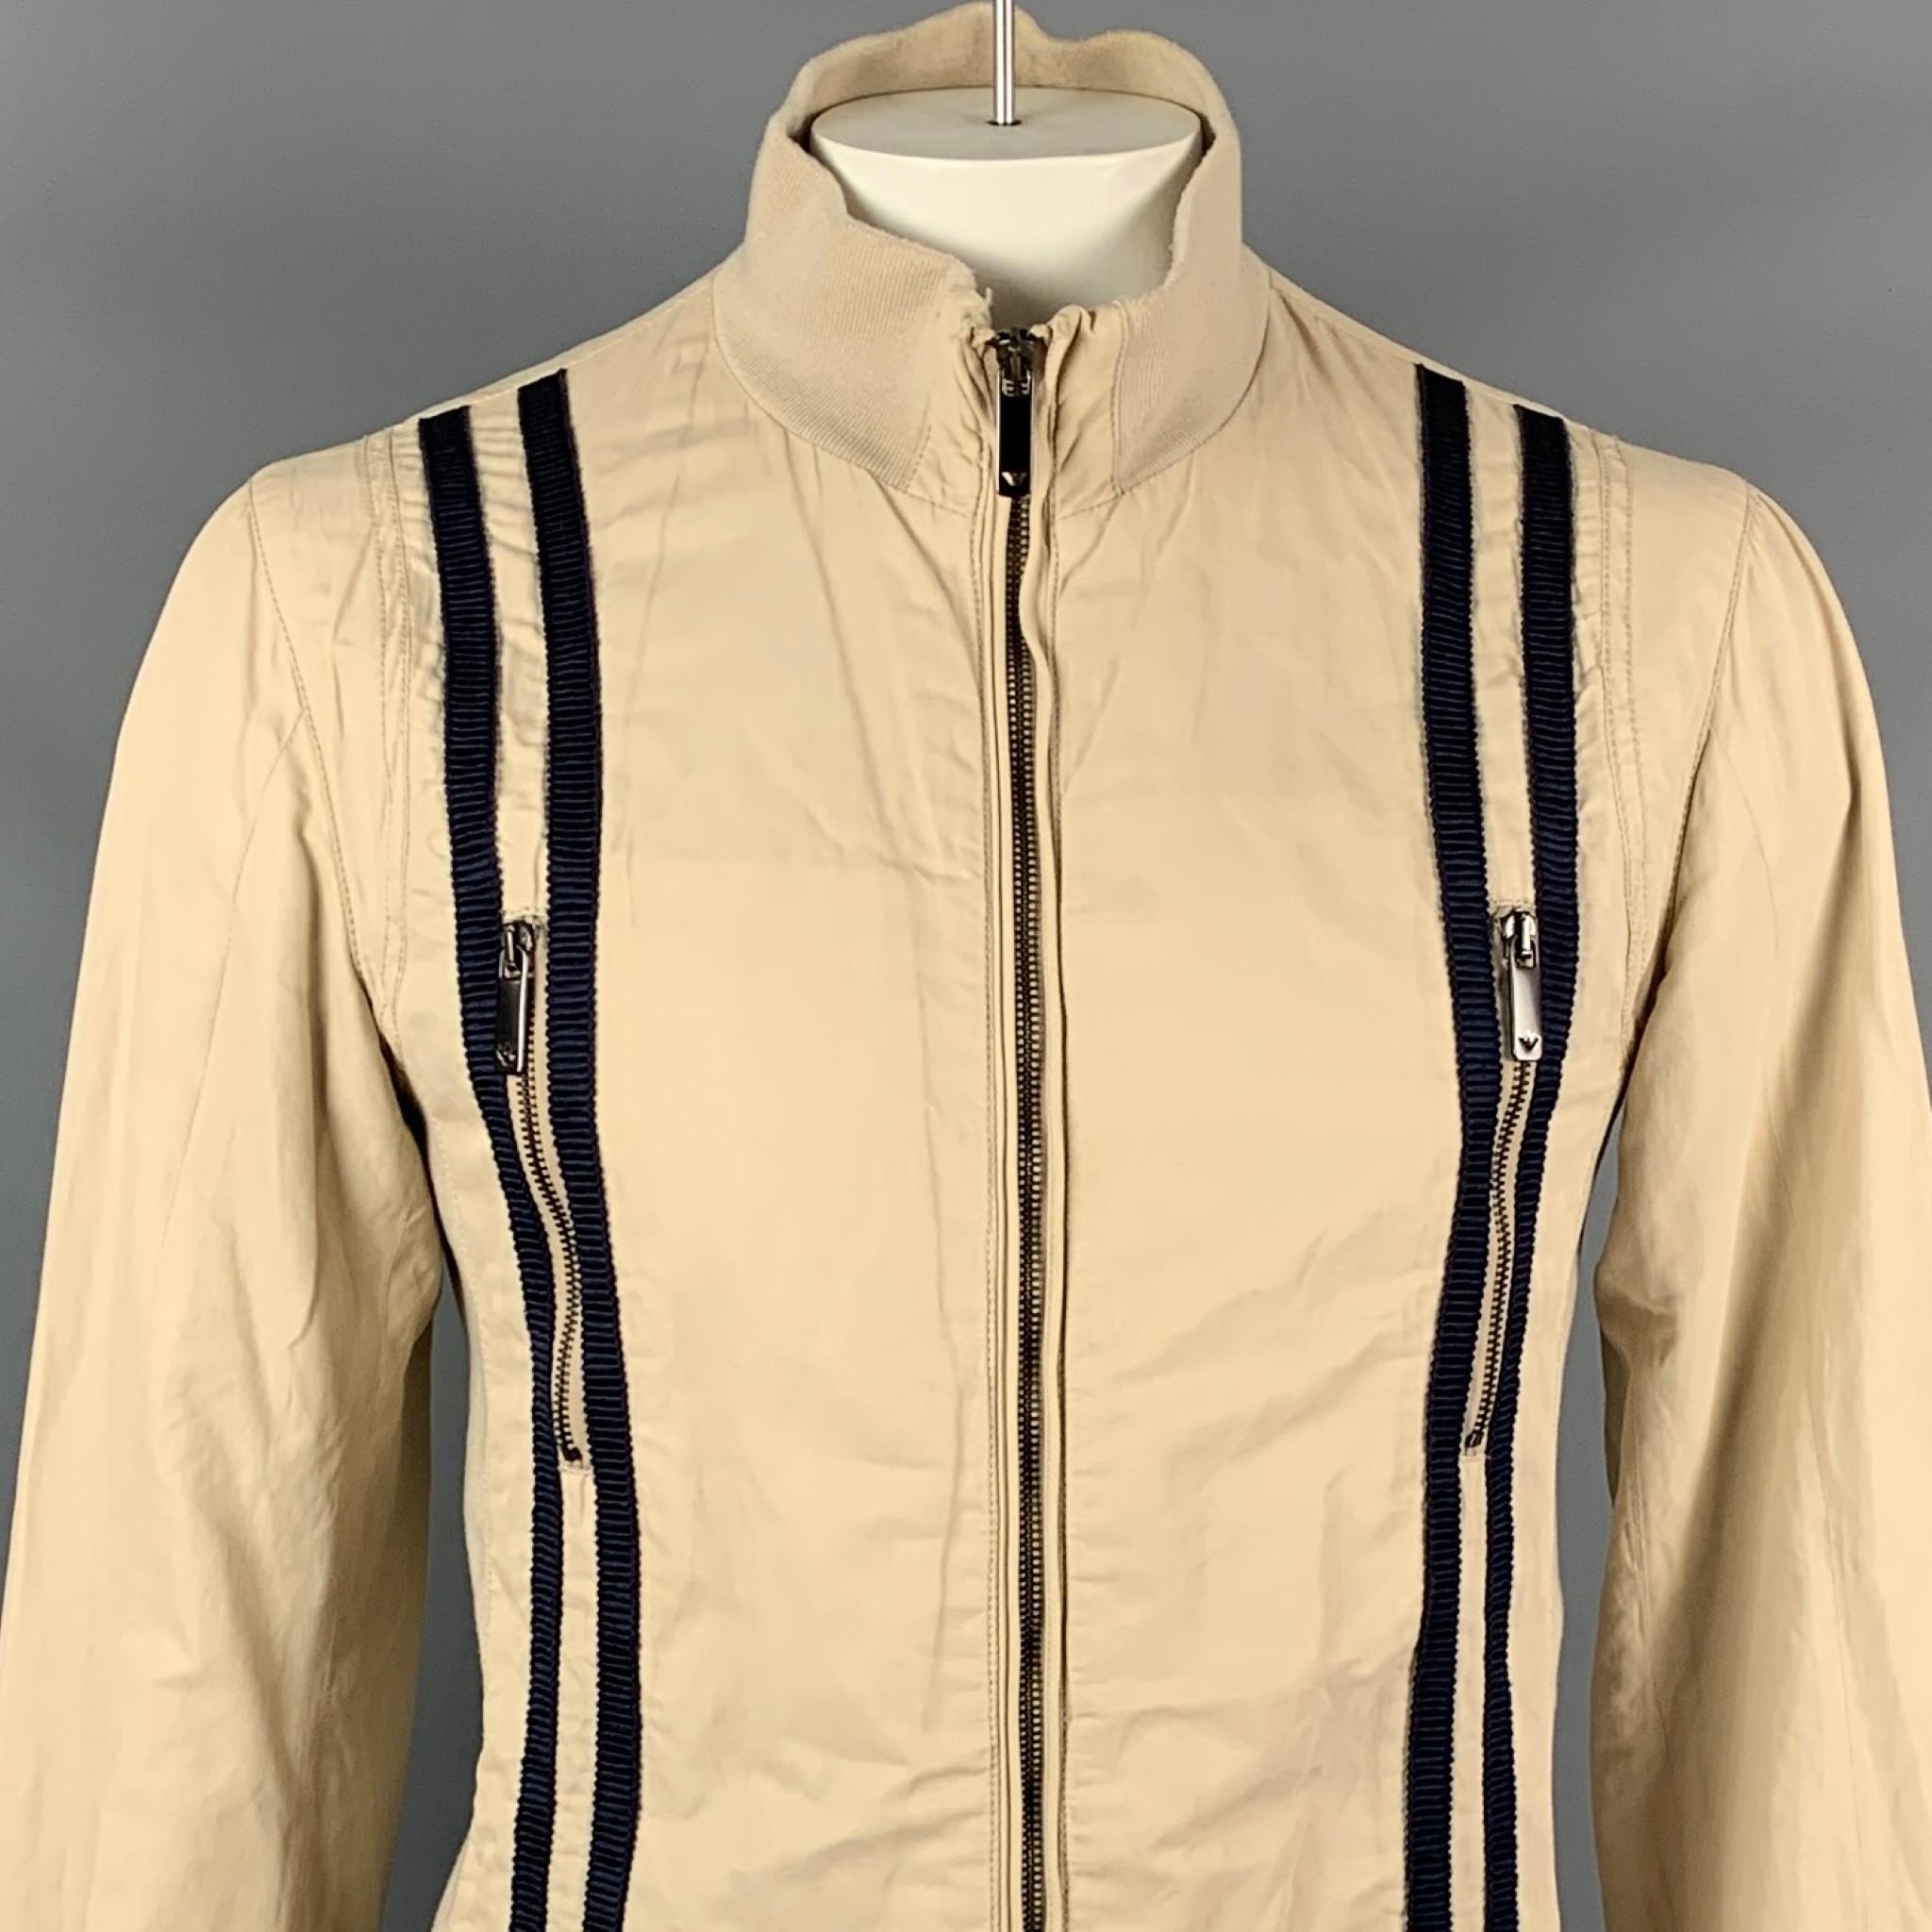 EMPORIO ARMANI jacket comes in a khaki cotton with a full liner featuring a navy trim, zipper details, high collar, front pockets, and a full zip up closure. 

Good Pre-Owned Condition. Light mark a front.
Marked: 52

Measurements:

Shoulder: 18